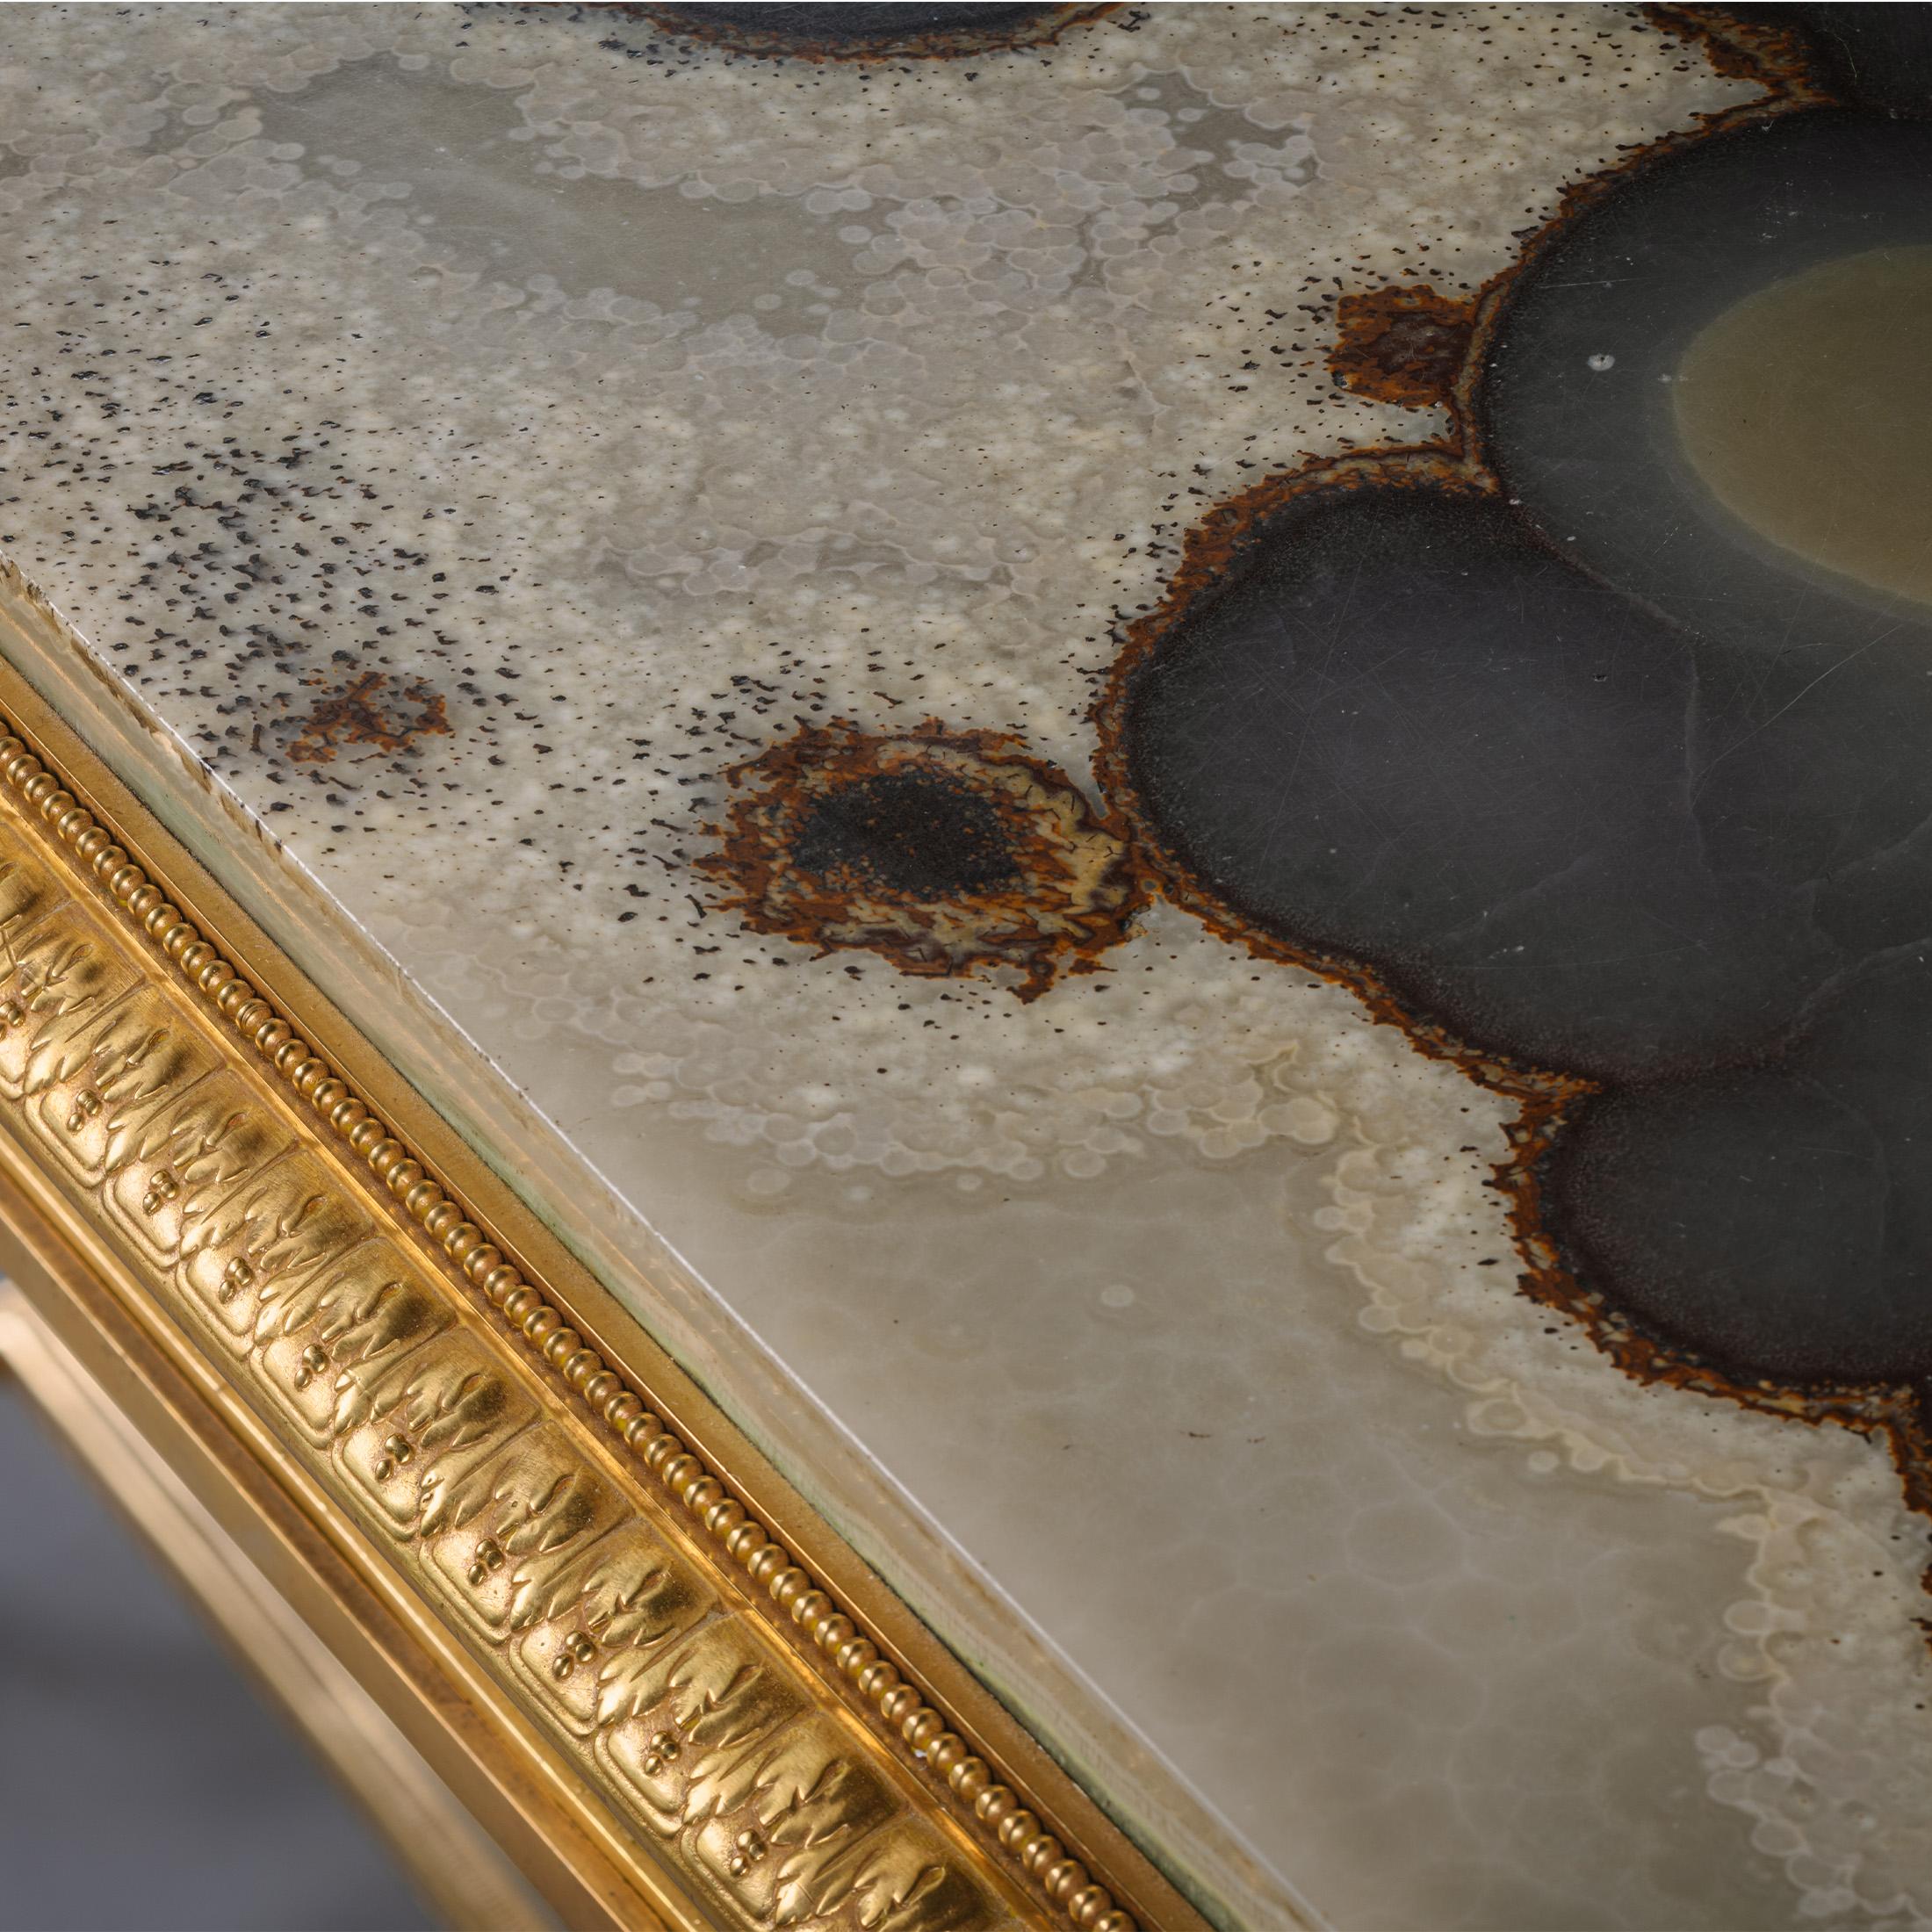 A Napoleon III gilt-bronze and onyx centre table, By Maison Marnyhac, Paris. 

Signed to the edge of the stretcher 'MAISON MARNYHAC 1. RUE DE LA PAIX PARIS'.

This opulent centre table has a beautifully patterned onyx top inset within stiff-leaf